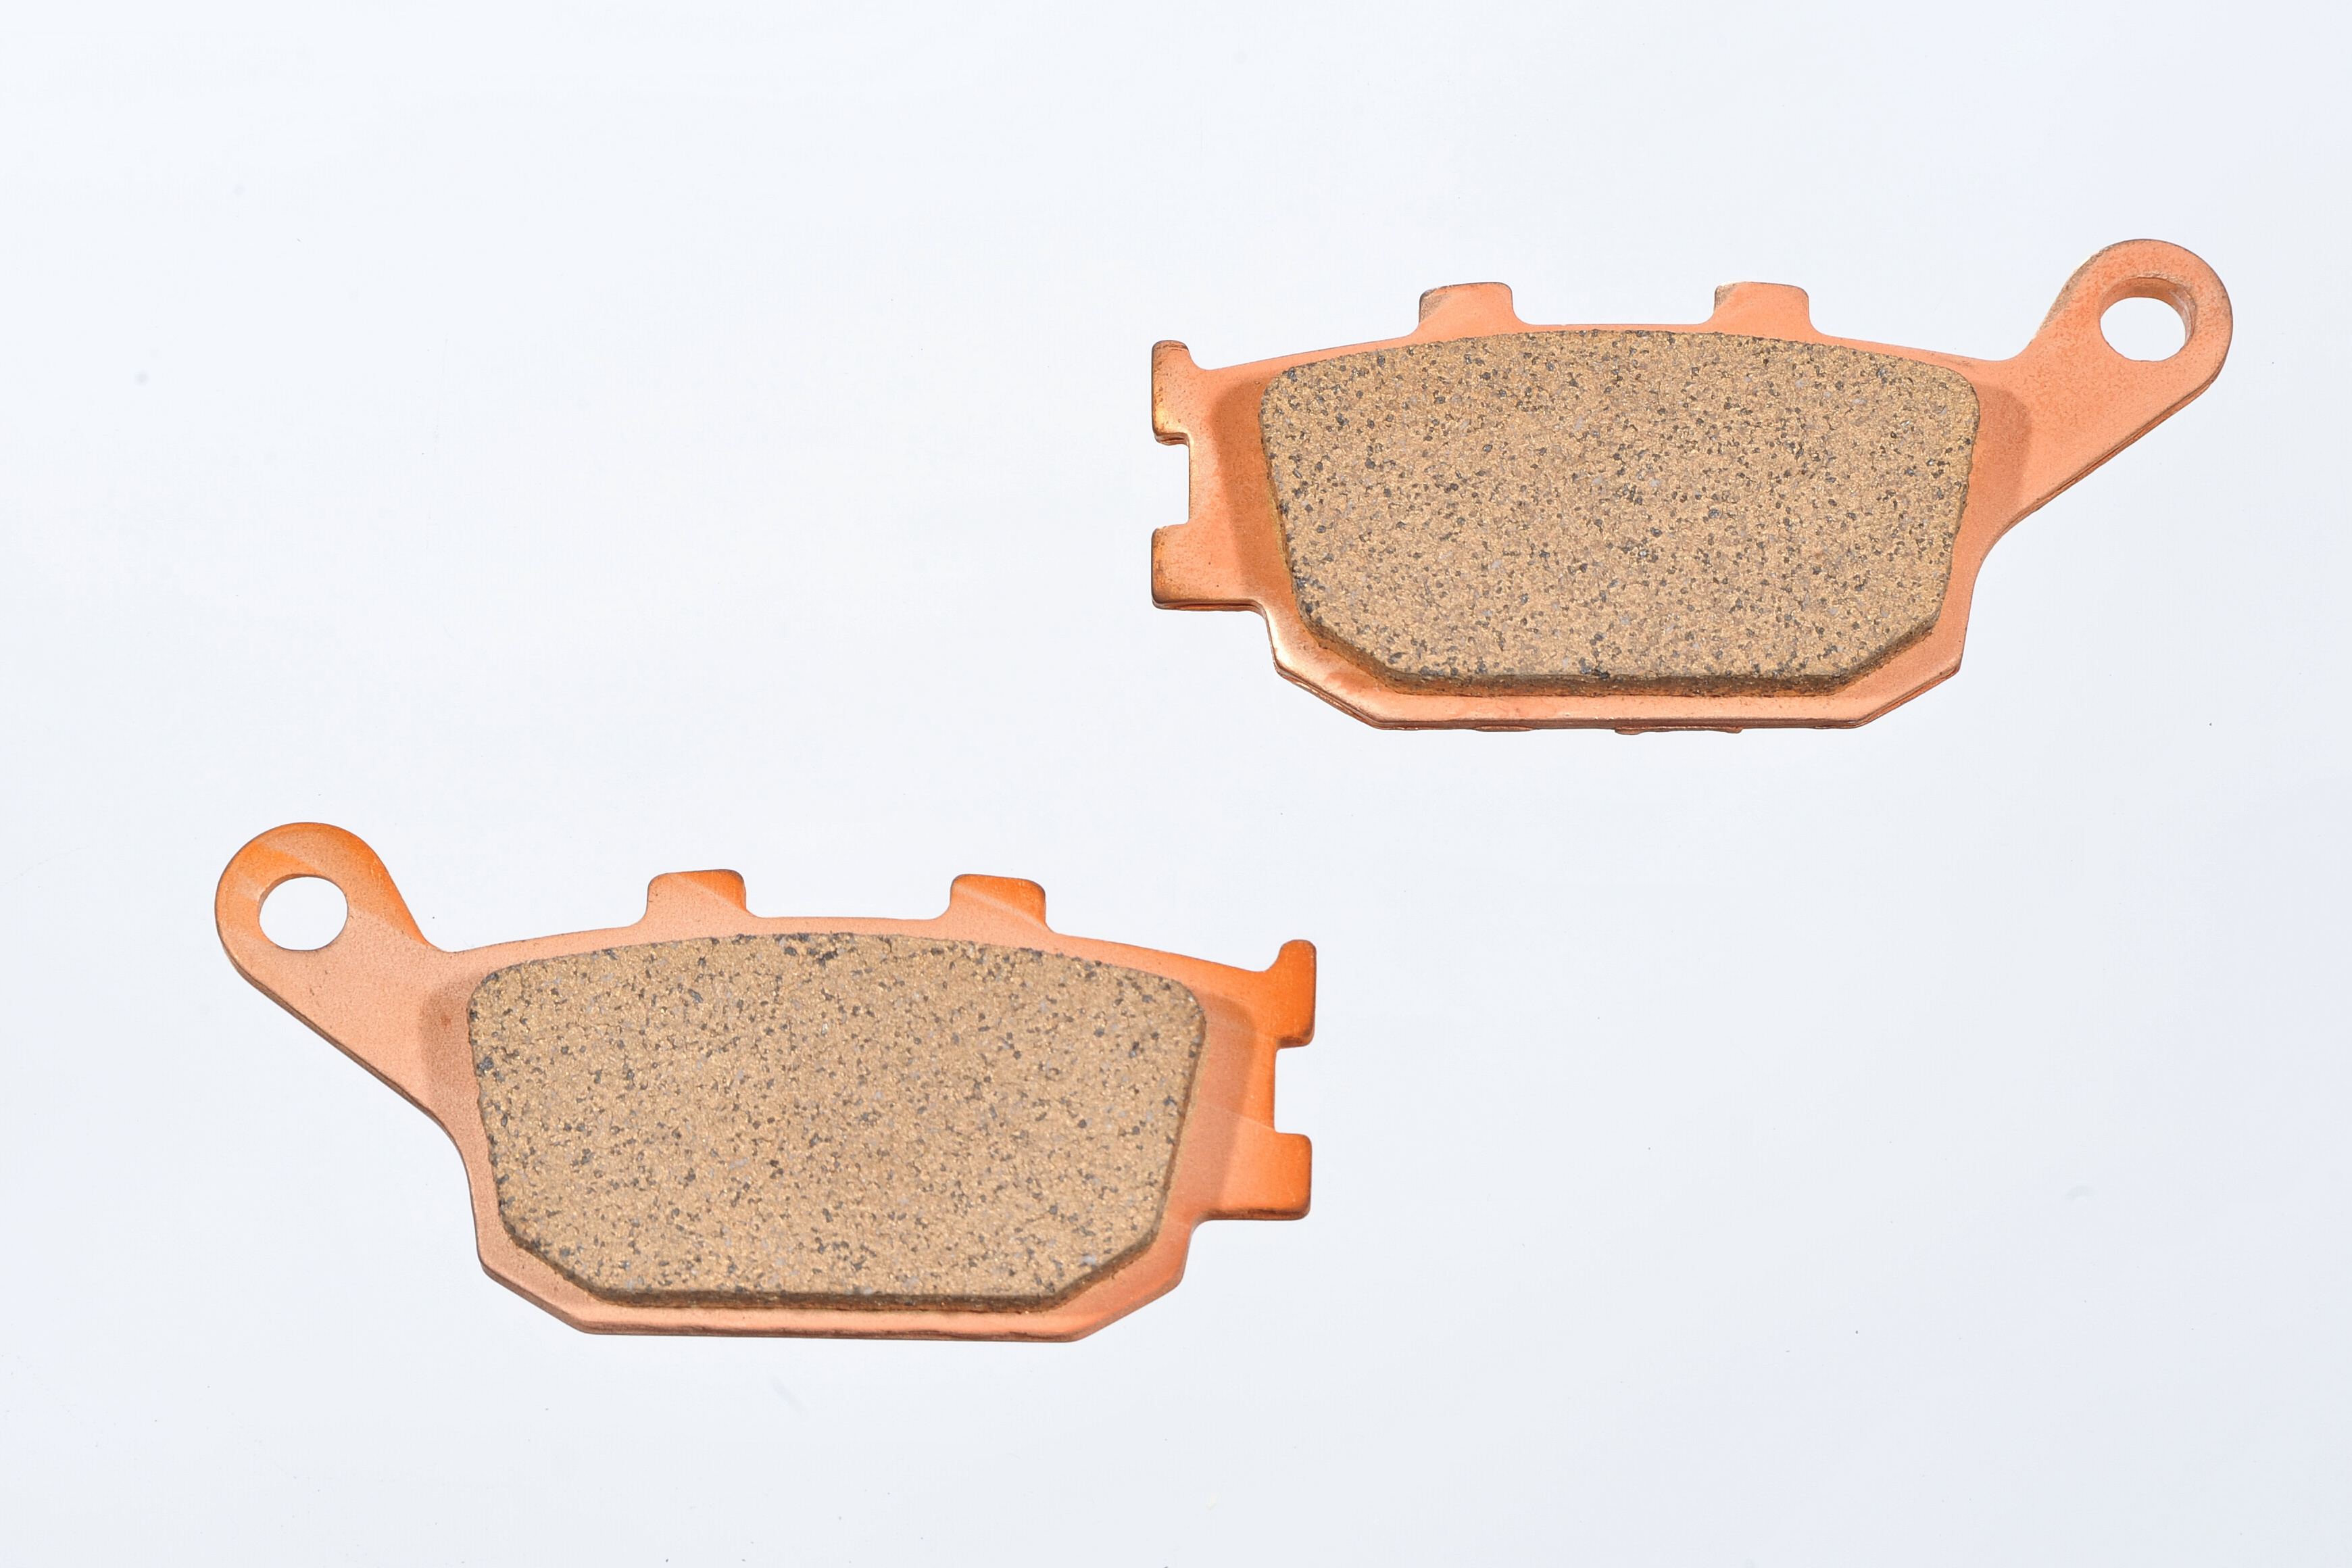 GOLDfren S33 Sintered Rear Brake Pads Fa174 Yamaha XSR 700 a ABS 2016 for sale online